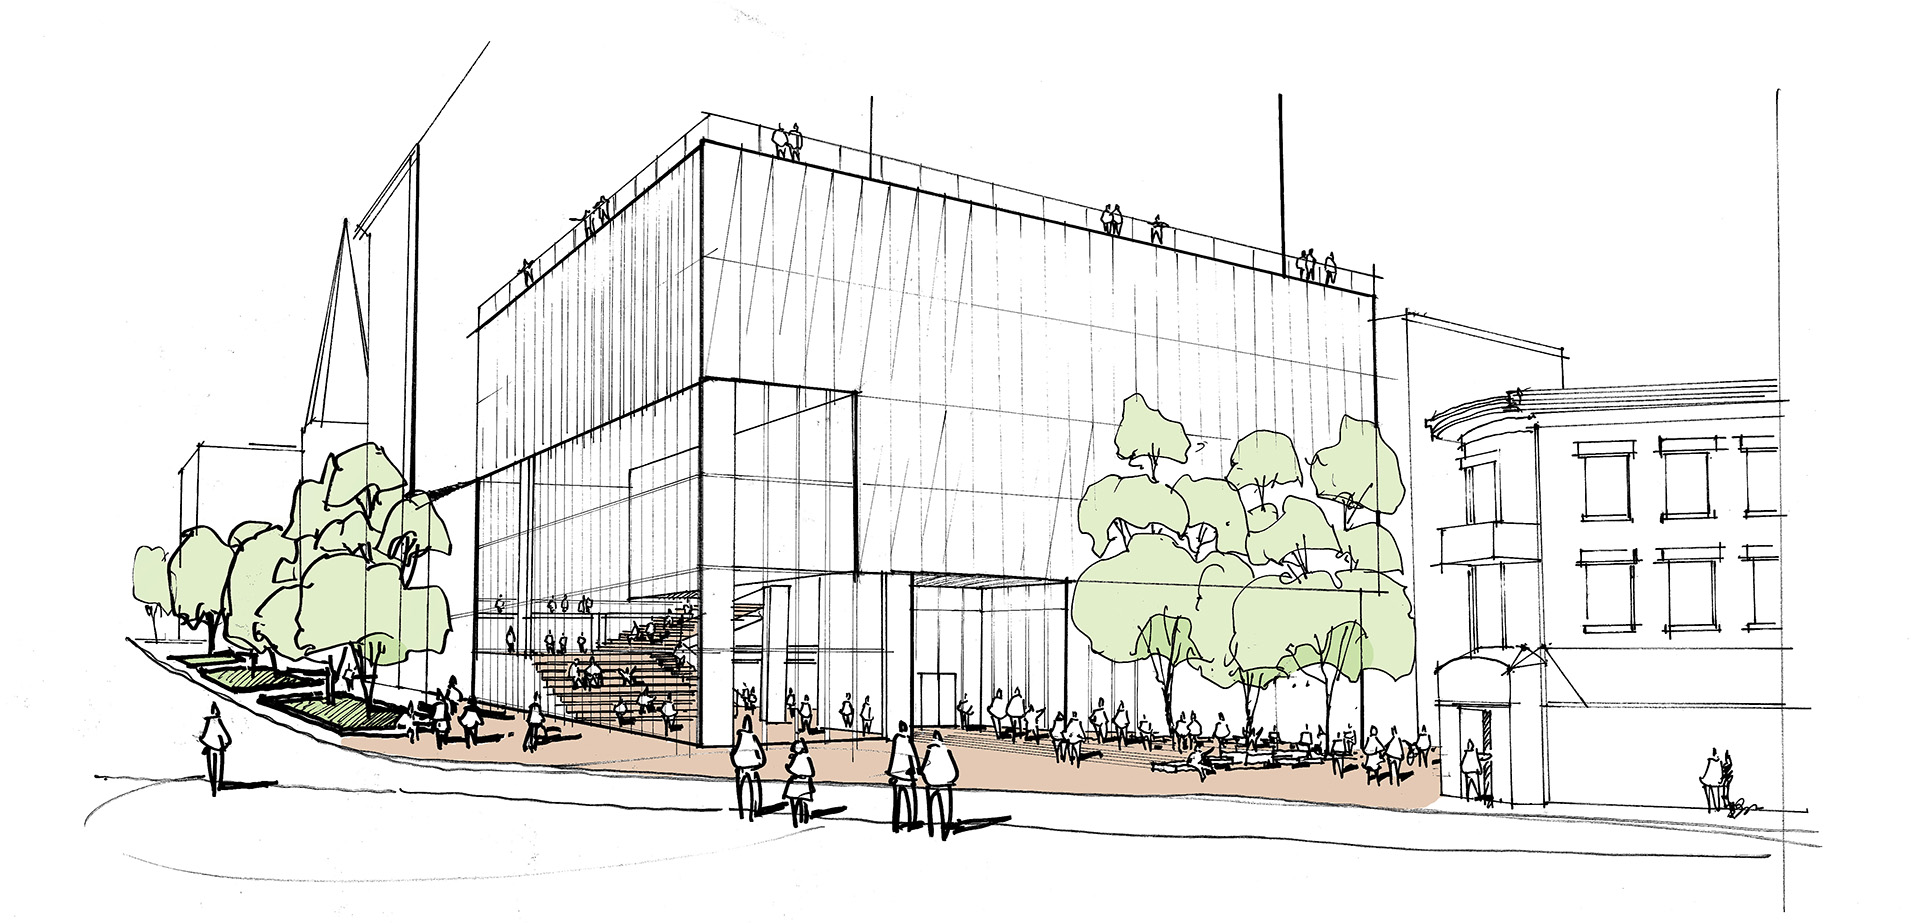 A conceptual sketch of the space and skale of the new history center.